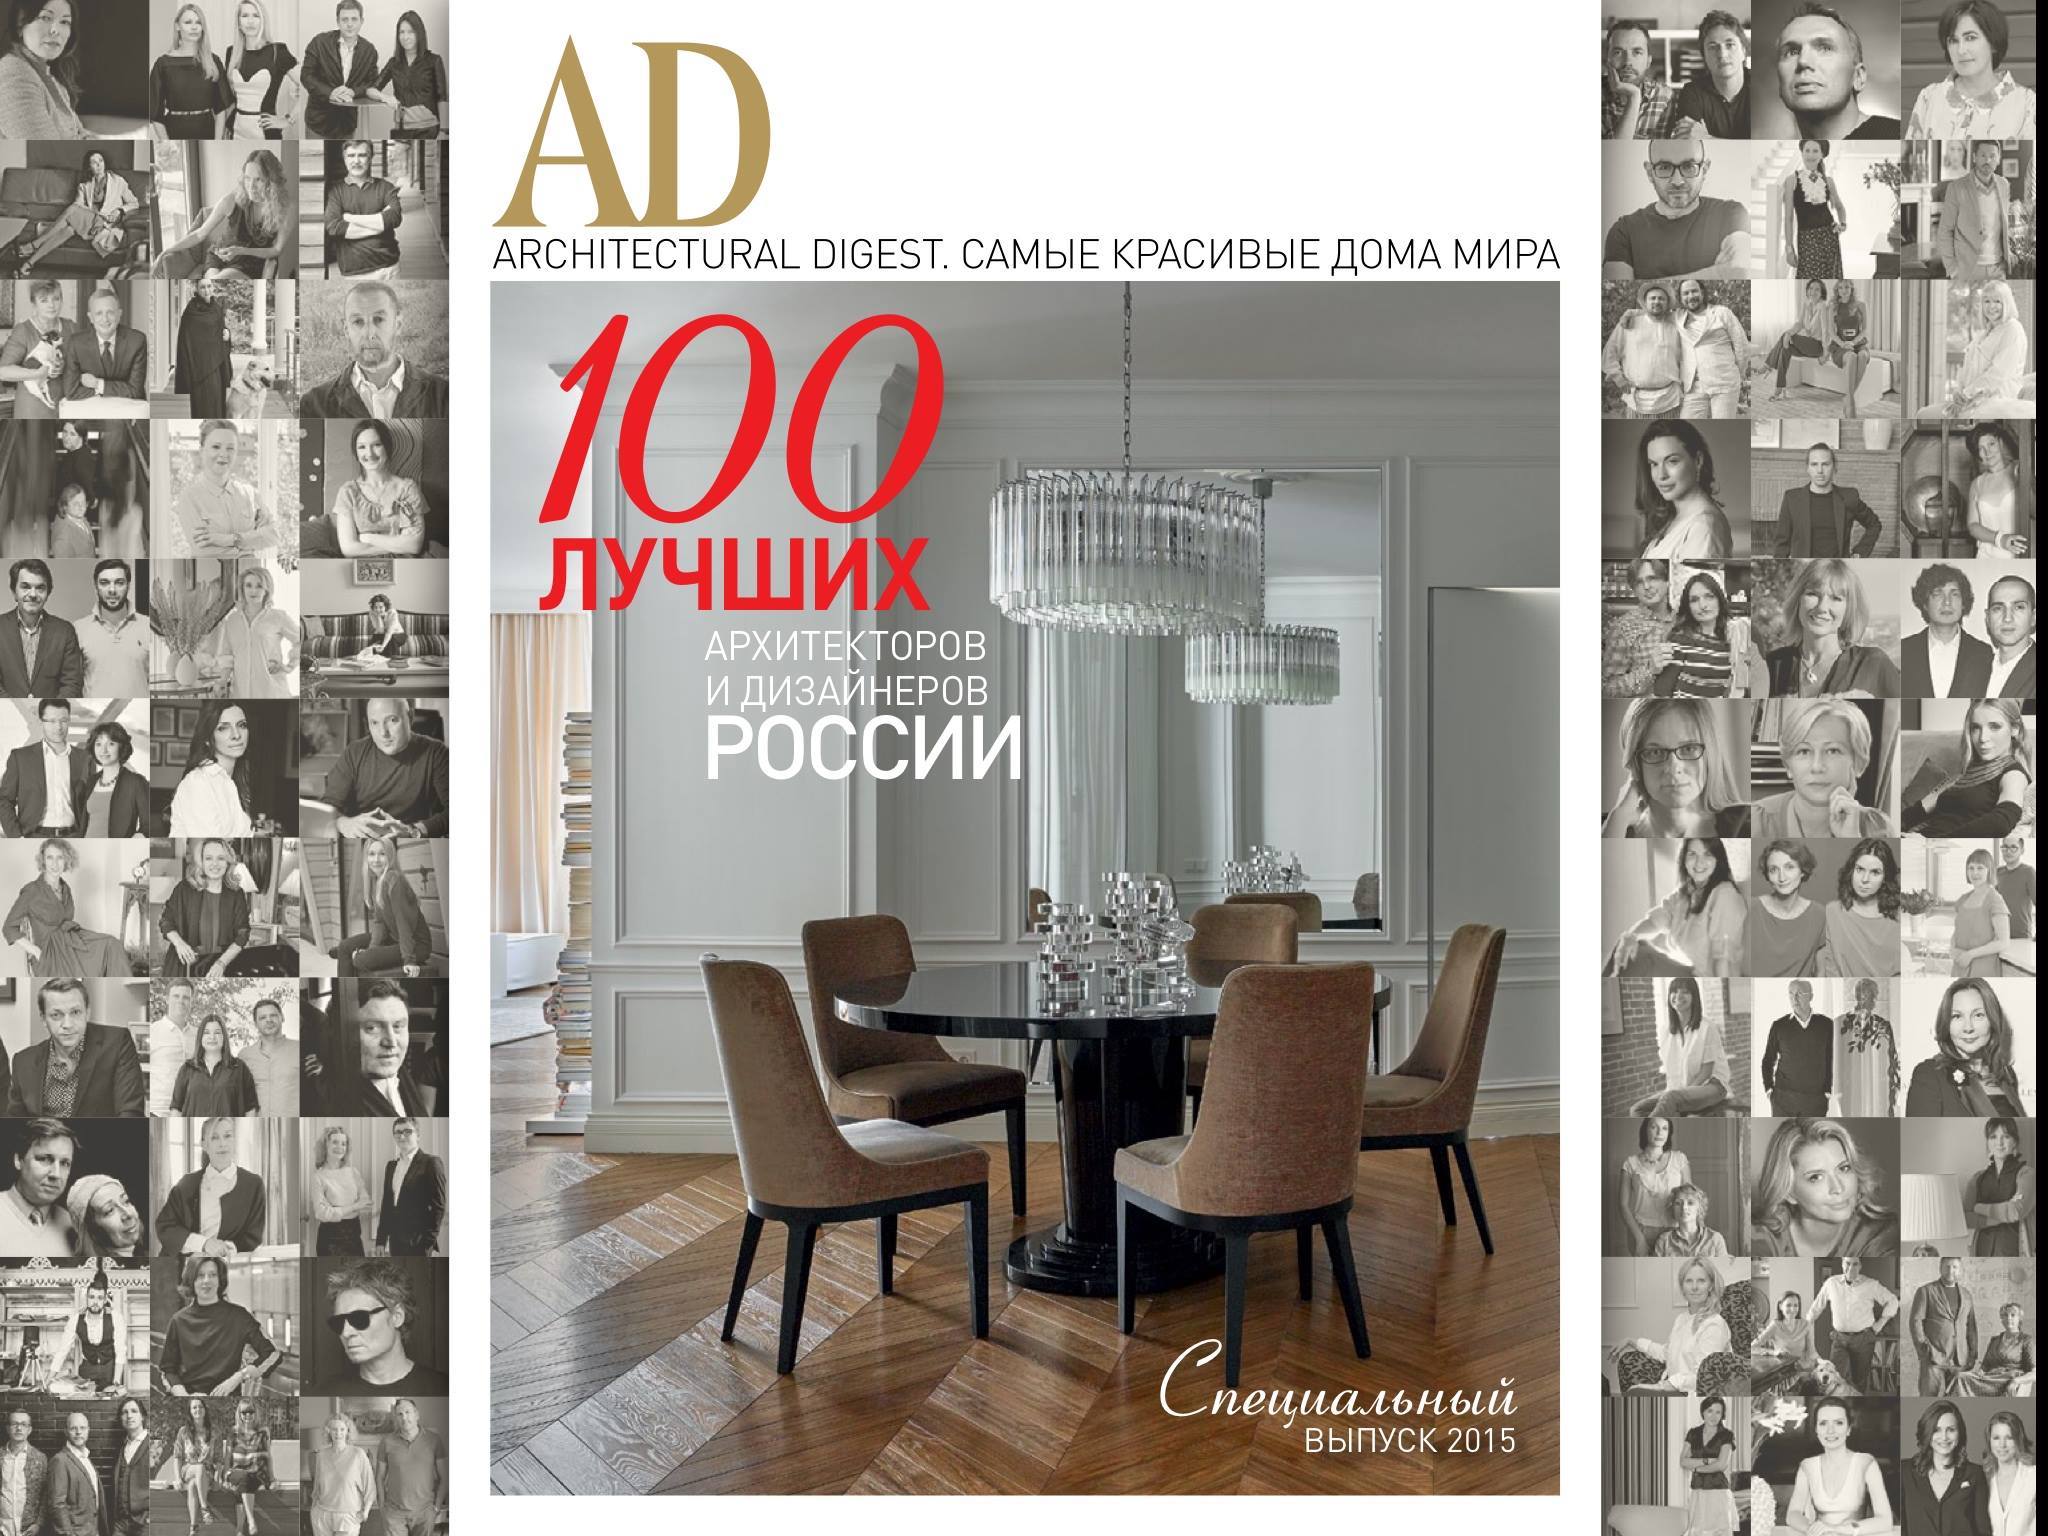 100 of the best architects and designers in Russia 2015